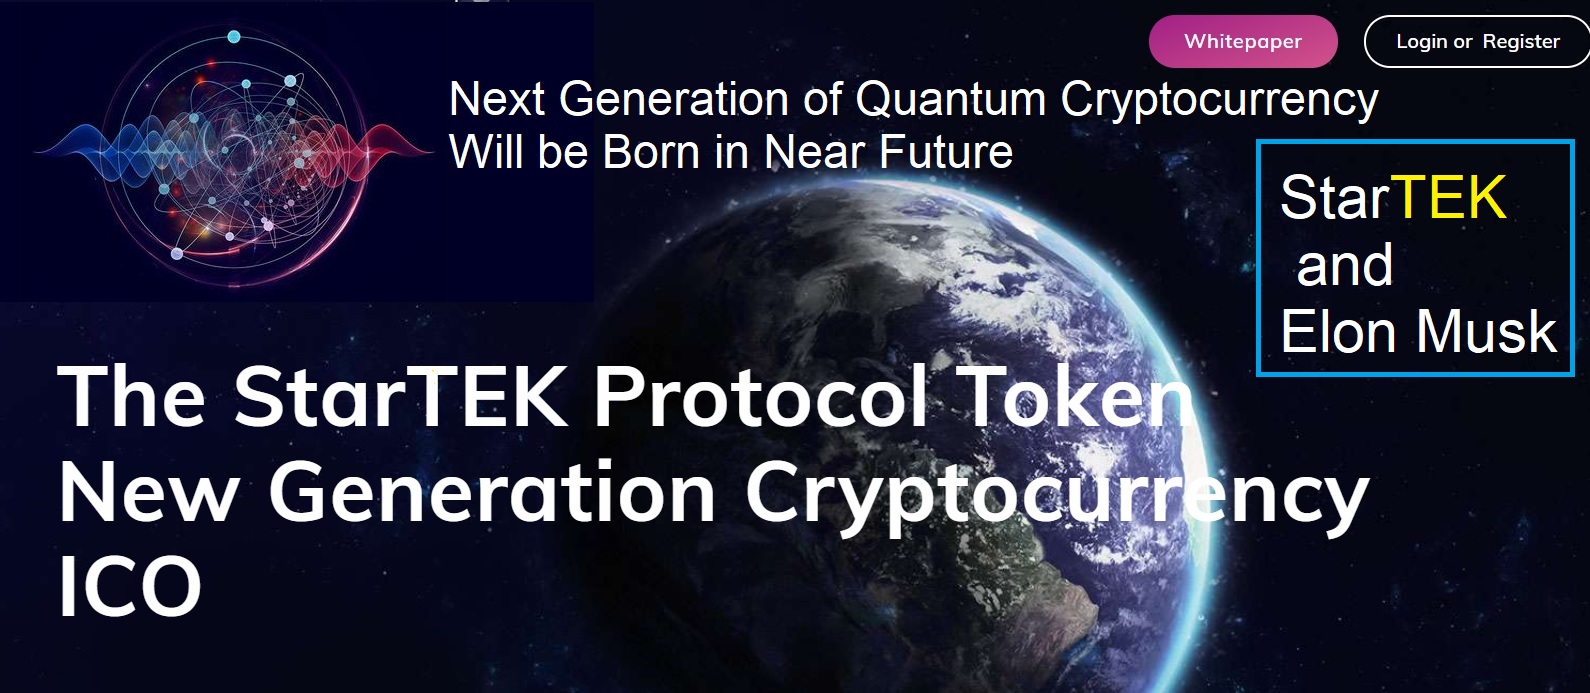 startek-project-will-create-the-next-generation-of-cryptocurrency-quantum-system